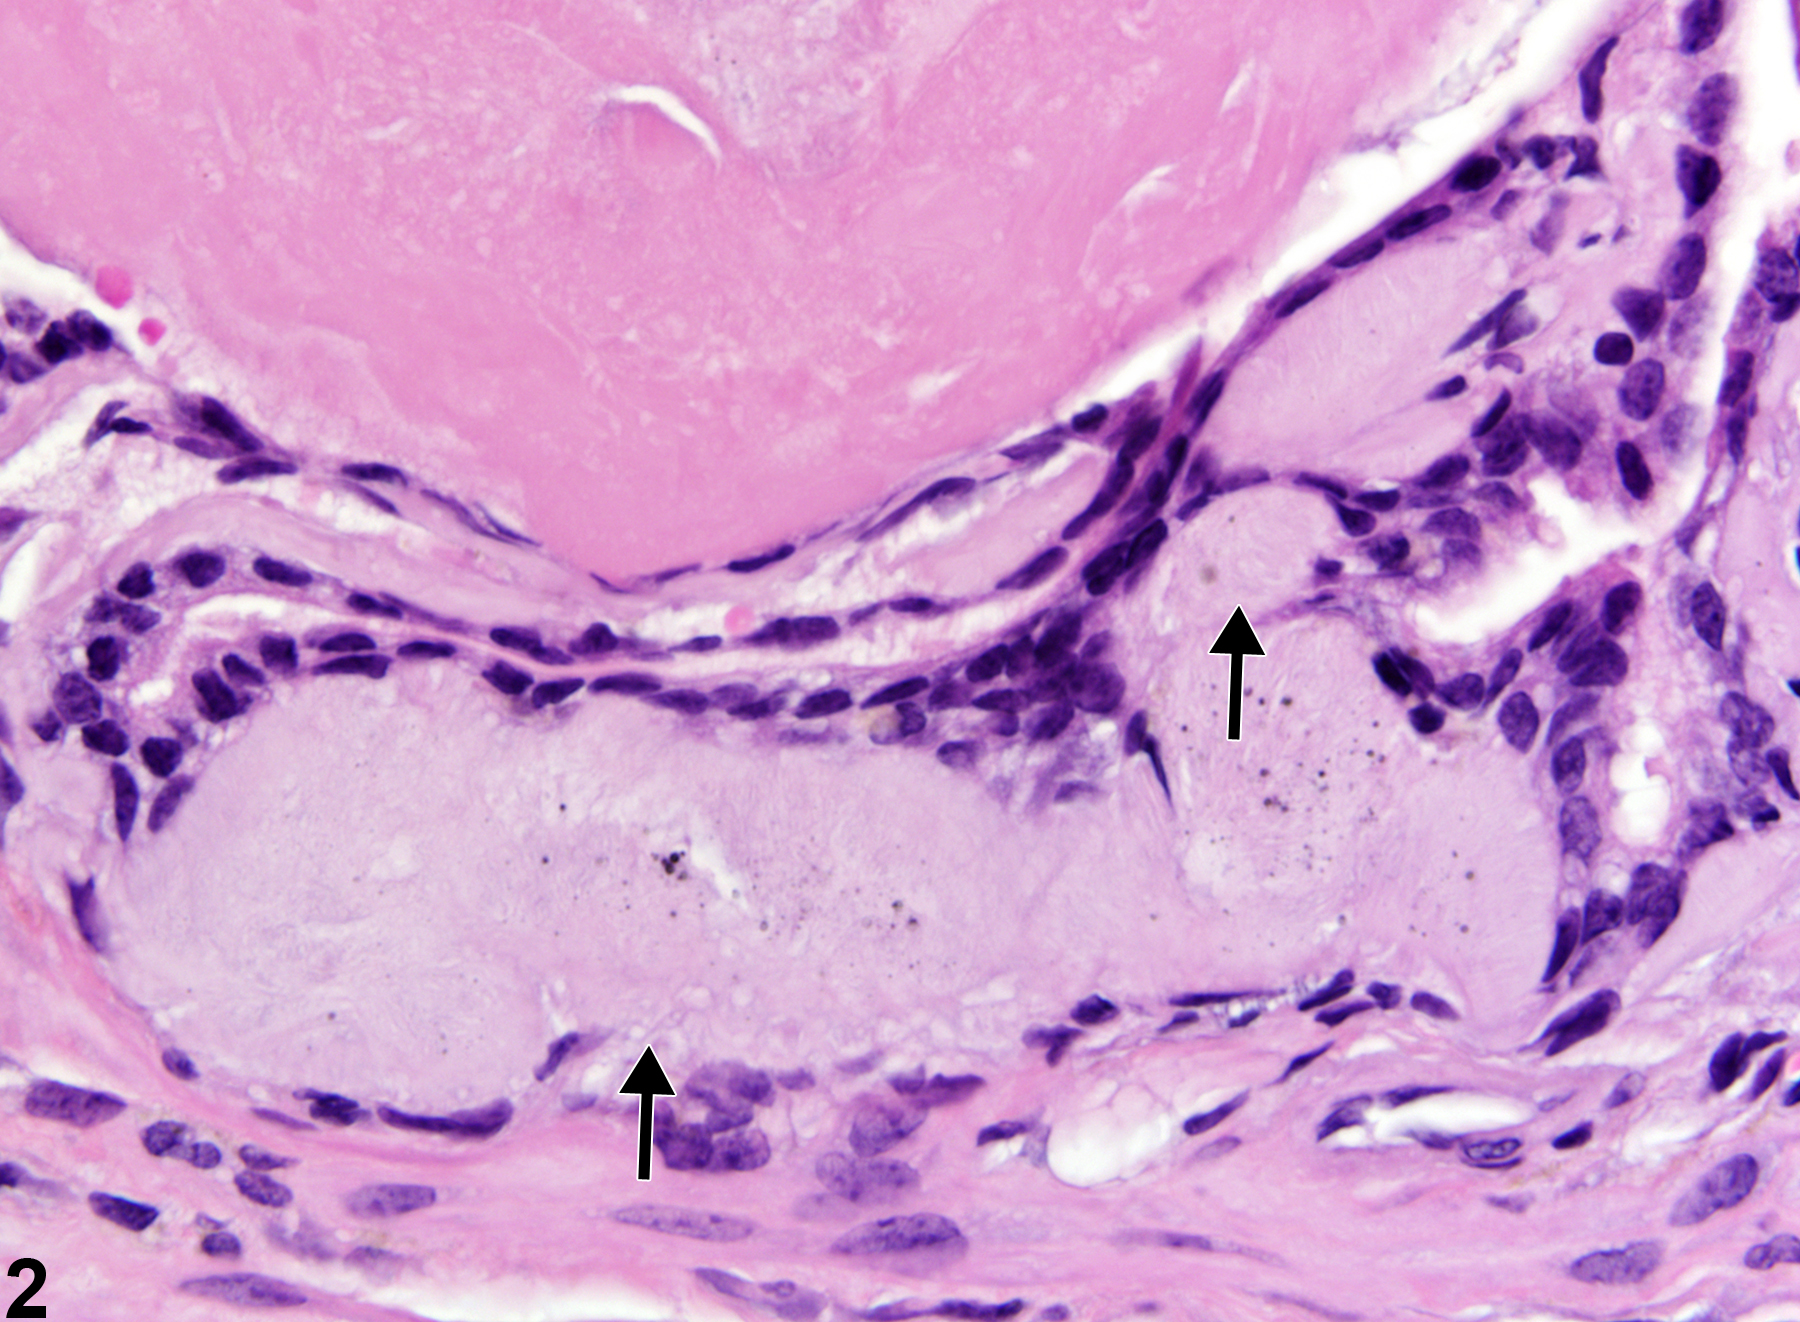 Image of amyloid in the seminal vesicle from a male B6C3F1 mouse in an chronic study